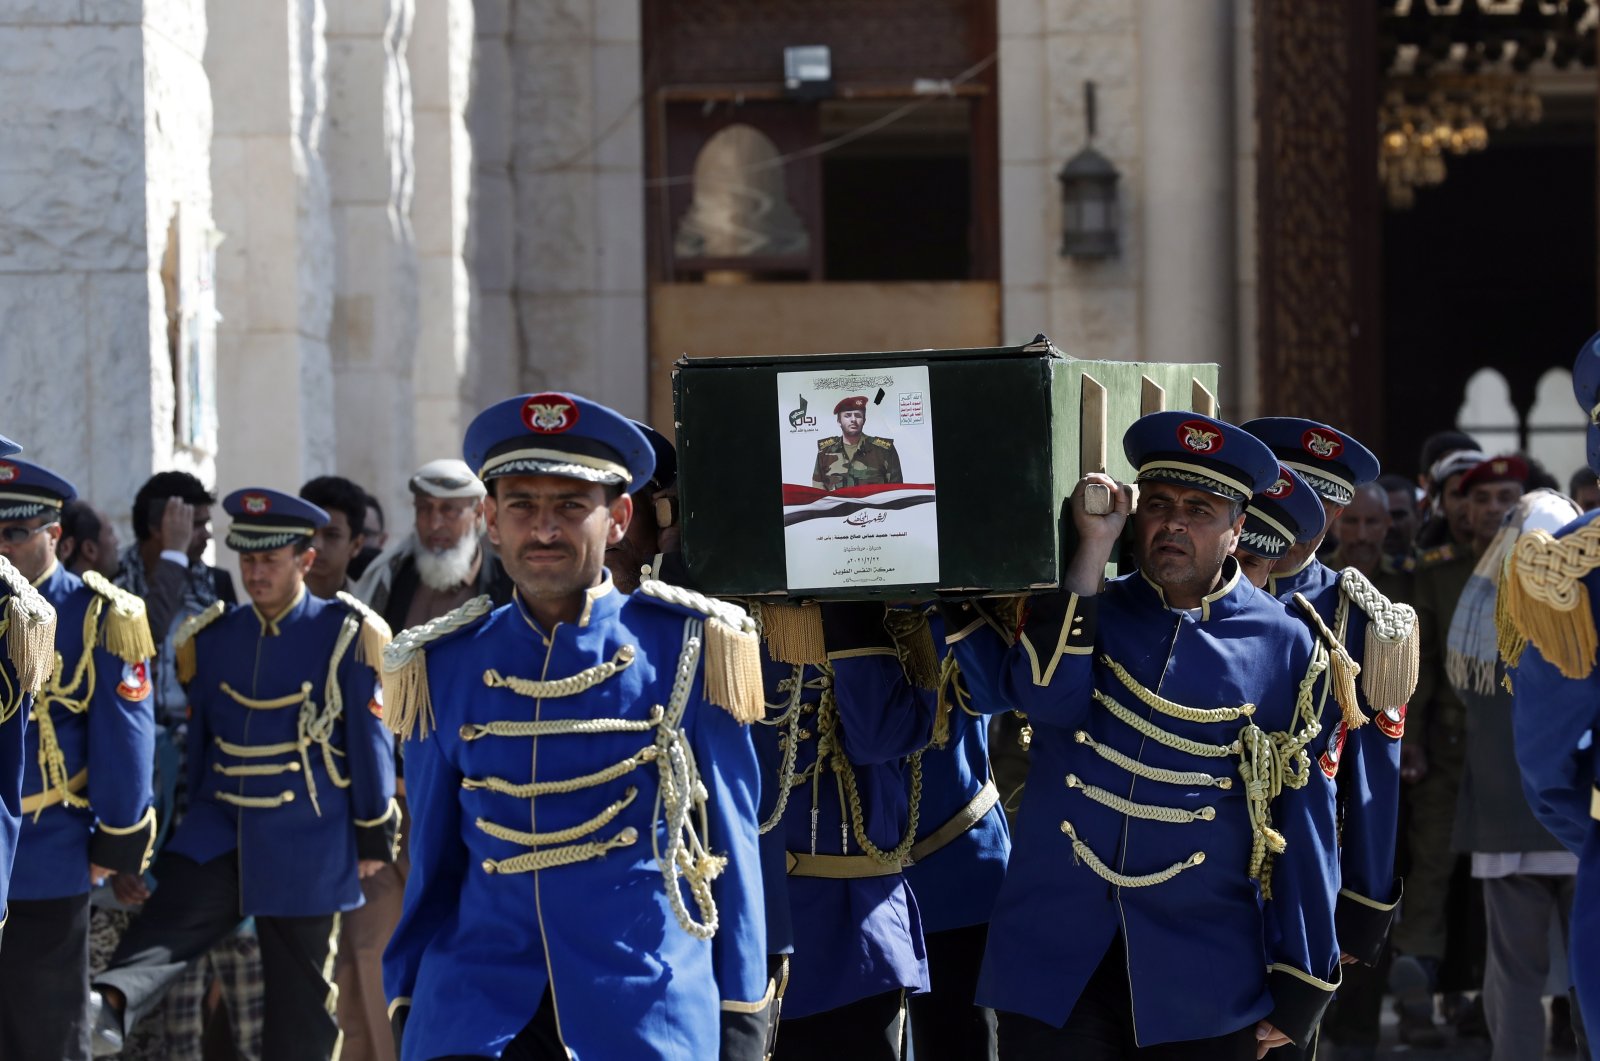 Members of Yemeni honor guard carry the coffin of a slain Houthi fighter during a funeral procession in Sanaa, Yemen, Feb. 24, 2021. (EPA Photo)